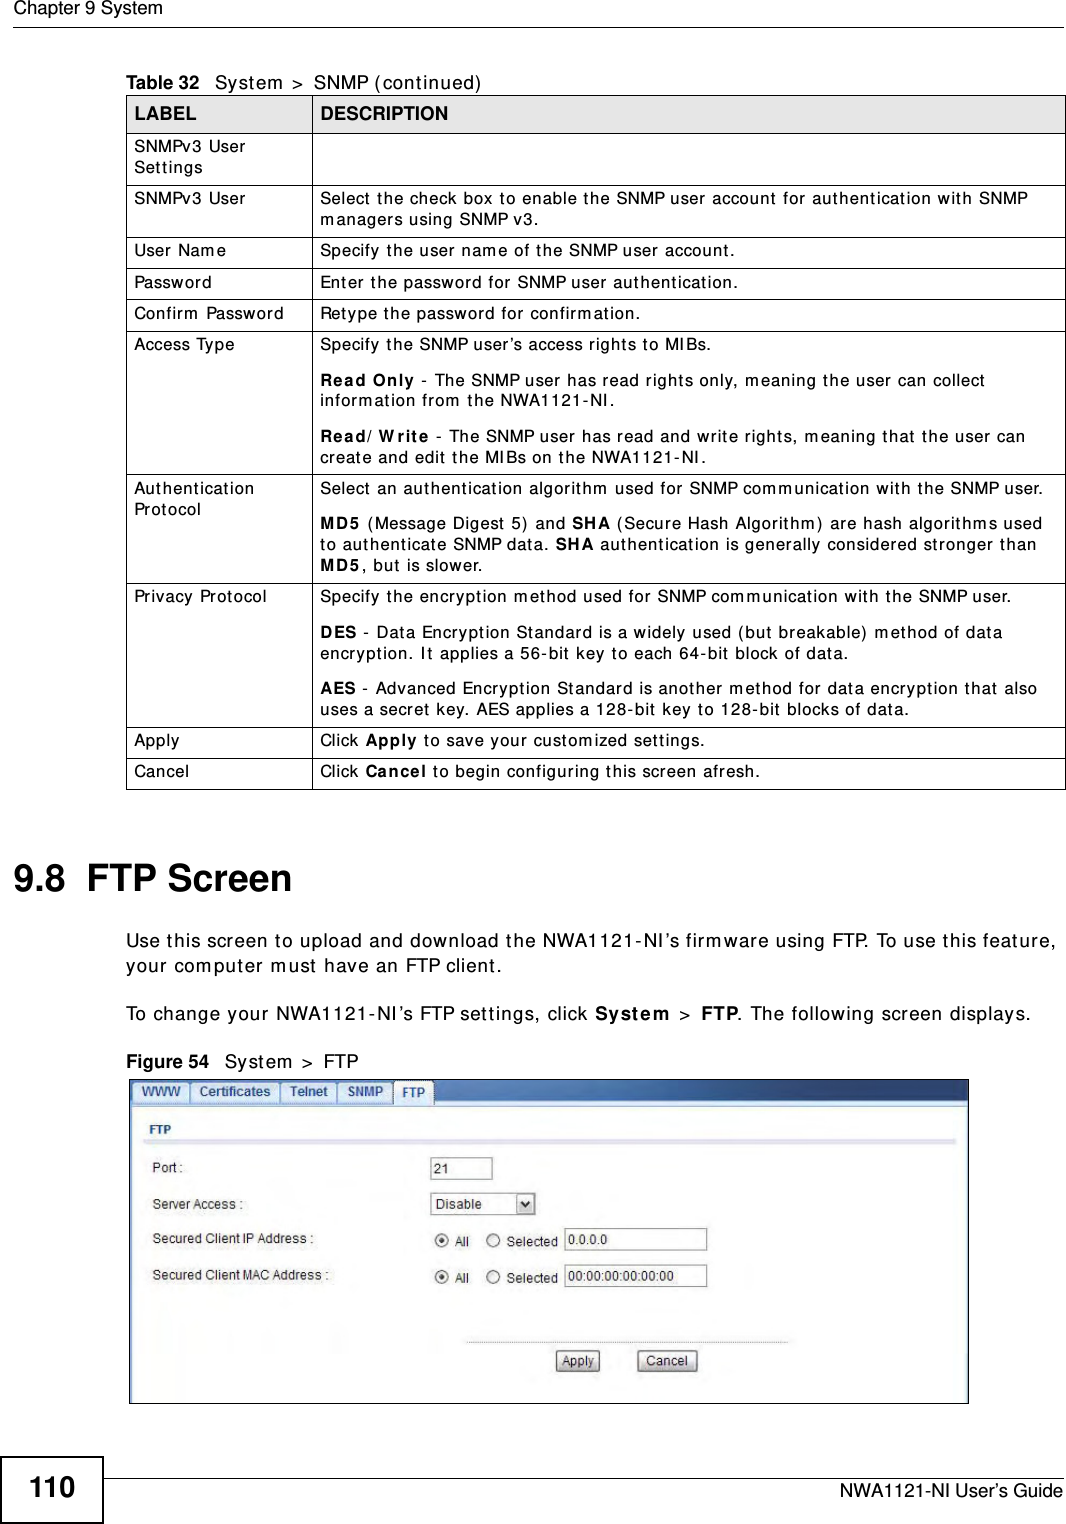 Chapter 9 SystemNWA1121-NI User’s Guide1109.8  FTP ScreenUse this screen to upload and download the NWA1121-NI’s firmware using FTP. To use this feature, your computer must have an FTP client.To change your NWA1121-NI’s FTP settings, click System &gt; FTP. The following screen displays.Figure 54   System &gt; FTPSNMPv3 User Settings SNMPv3 User Select the check box to enable the SNMP user account for authentication with SNMP managers using SNMP v3. User Name Specify the user name of the SNMP user account.Password Enter the password for SNMP user authentication. Confirm Password Retype the password for confirmation.Access Type Specify the SNMP user’s access rights to MIBs.Read Only - The SNMP user has read rights only, meaning the user can collect information from the NWA1121-NI.Read/Write - The SNMP user has read and write rights, meaning that the user can create and edit the MIBs on the NWA1121-NI.Authentication Protocol Select an authentication algorithm used for SNMP communication with the SNMP user.MD5 (Message Digest 5) and SHA (Secure Hash Algorithm) are hash algorithms used to authenticate SNMP data. SHA authentication is generally considered stronger than MD5, but is slower. Privacy Protocol Specify the encryption method used for SNMP communication with the SNMP user. DES - Data Encryption Standard is a widely used (but breakable) method of data encryption. It applies a 56-bit key to each 64-bit block of data.AES - Advanced Encryption Standard is another method for data encryption that also uses a secret key. AES applies a 128-bit key to 128-bit blocks of data.Apply Click Apply to save your customized settings. Cancel Click Cancel to begin configuring this screen afresh.Table 32   System &gt; SNMP (continued)LABEL DESCRIPTION